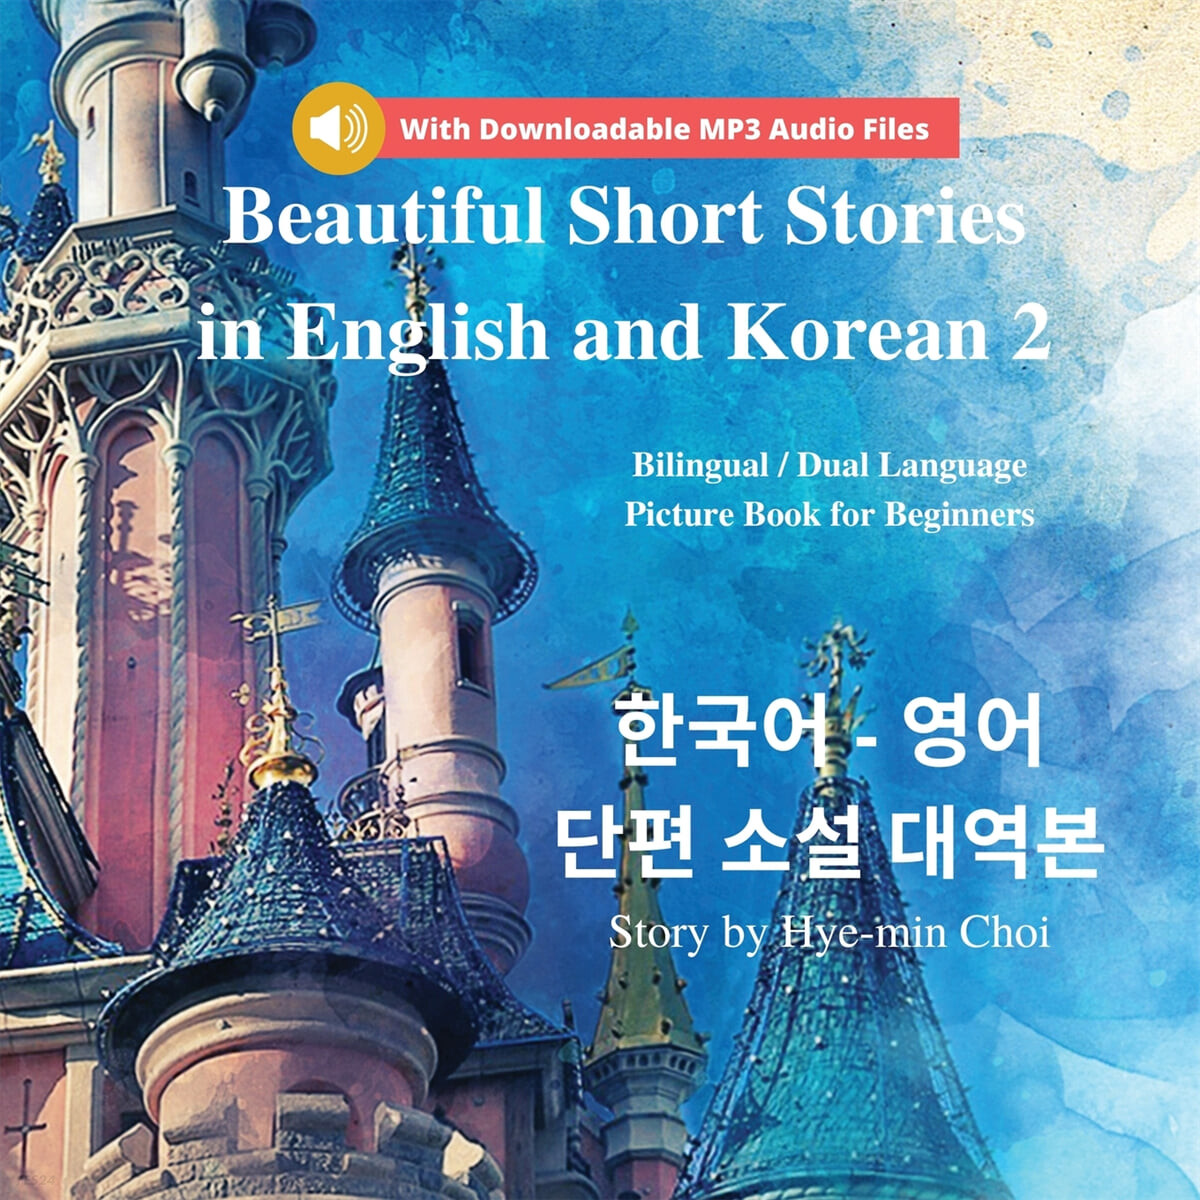 Beautiful Short Stories in English and Korean 2 With Downloadable MP3 Files (Bilingual / Dual Language Picture Book for Beginners)